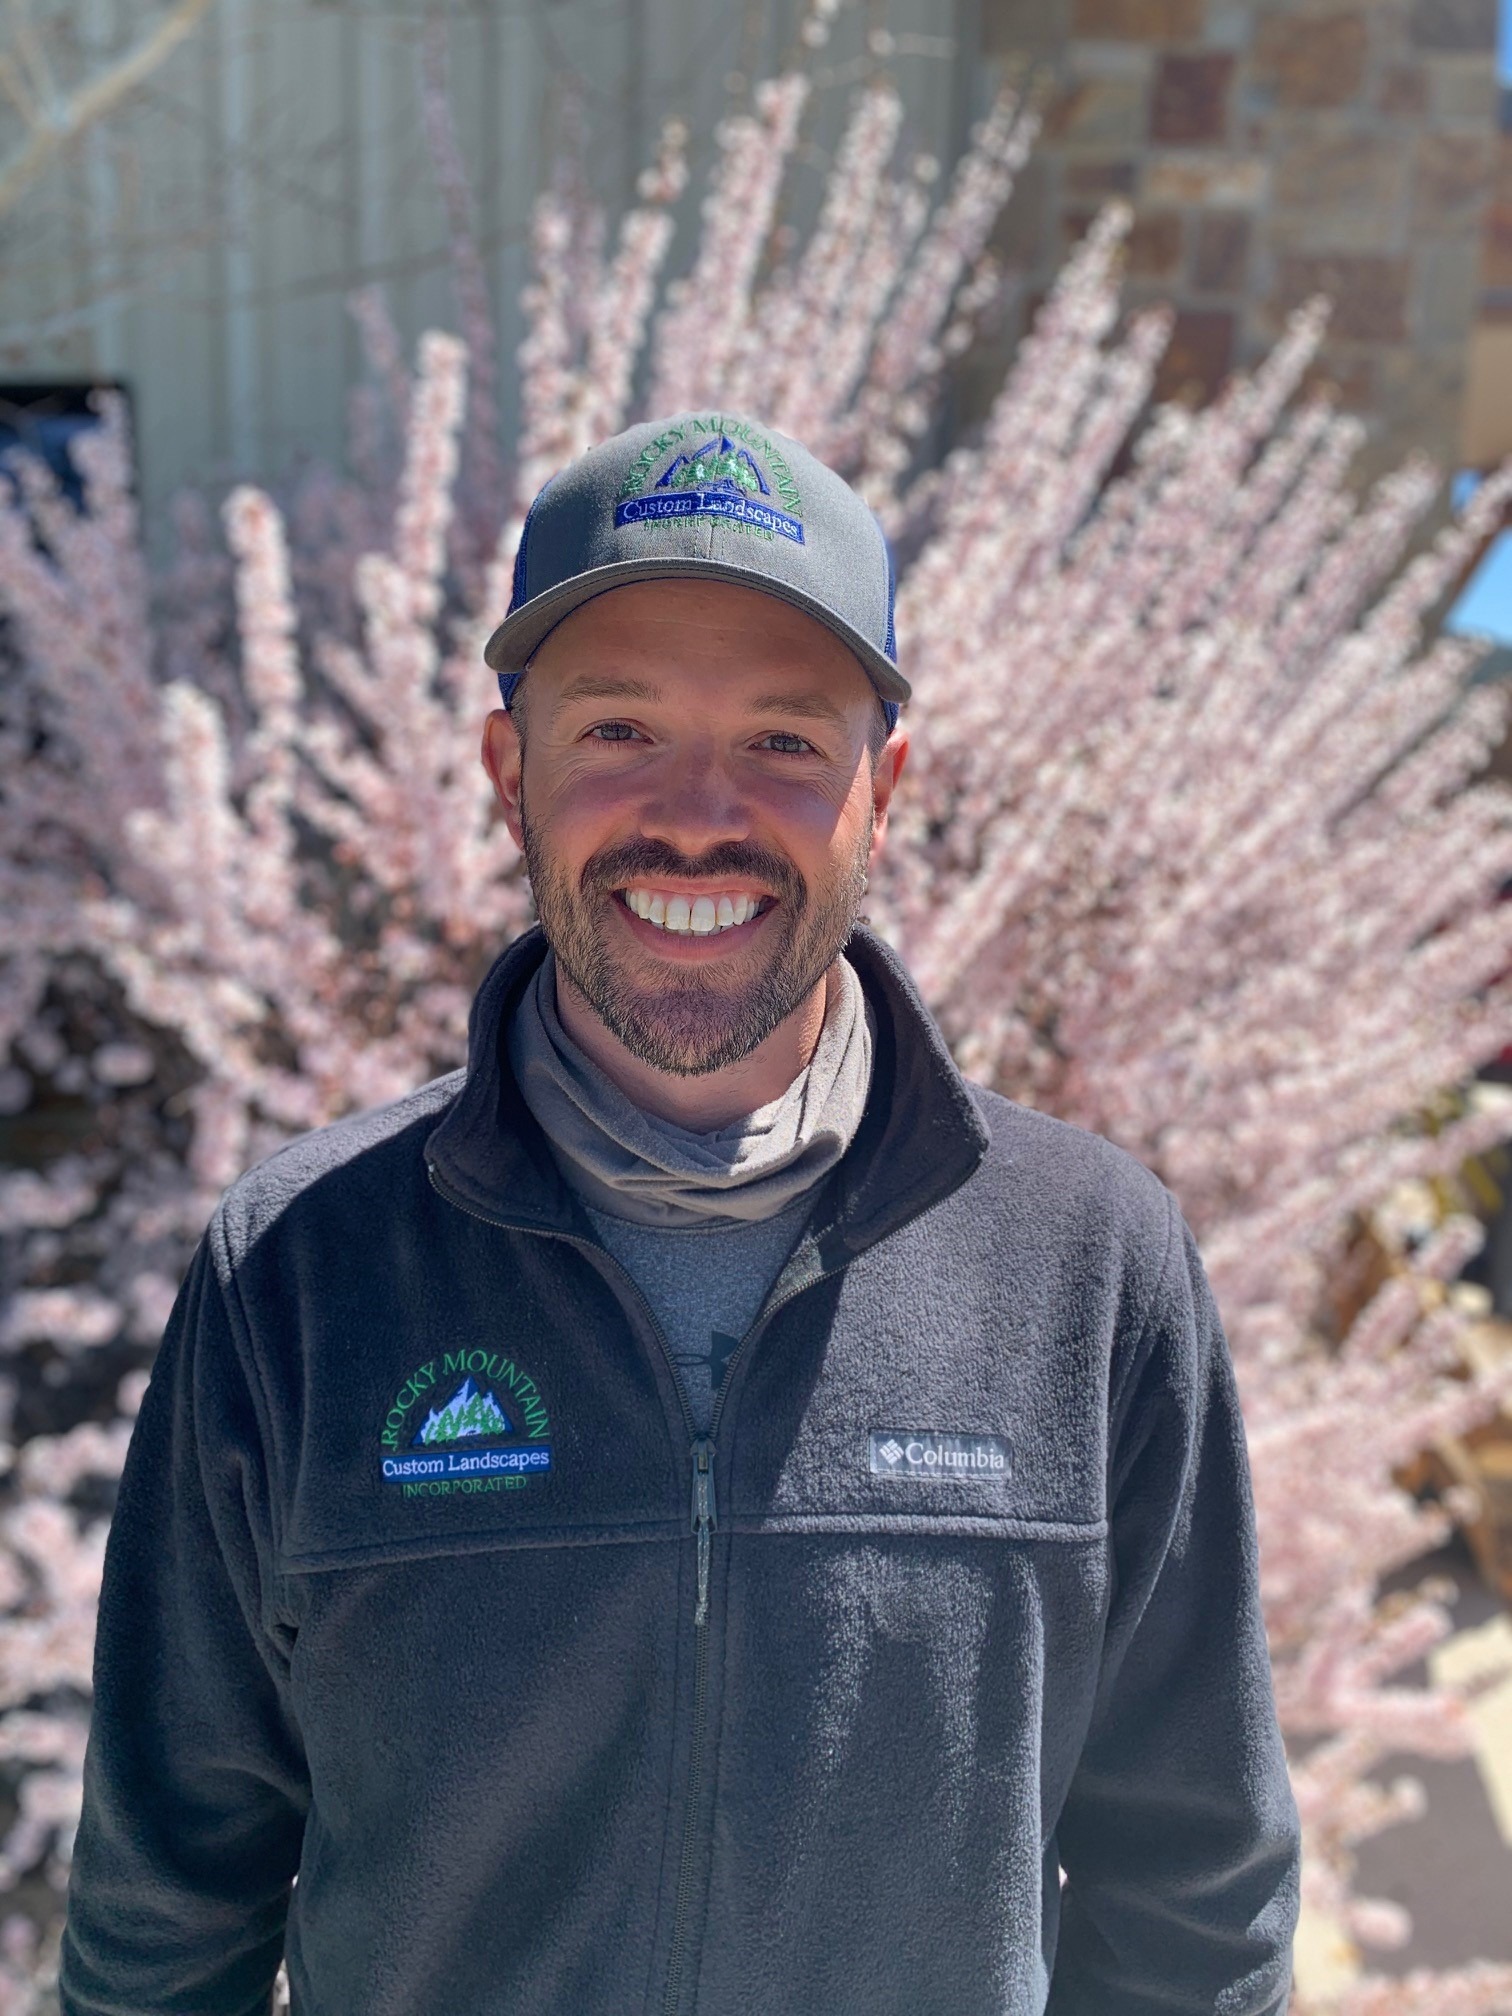 A person with a beard and cap is smiling in front of blooming pink flowers, wearing a fleece jacket on a sunny day.